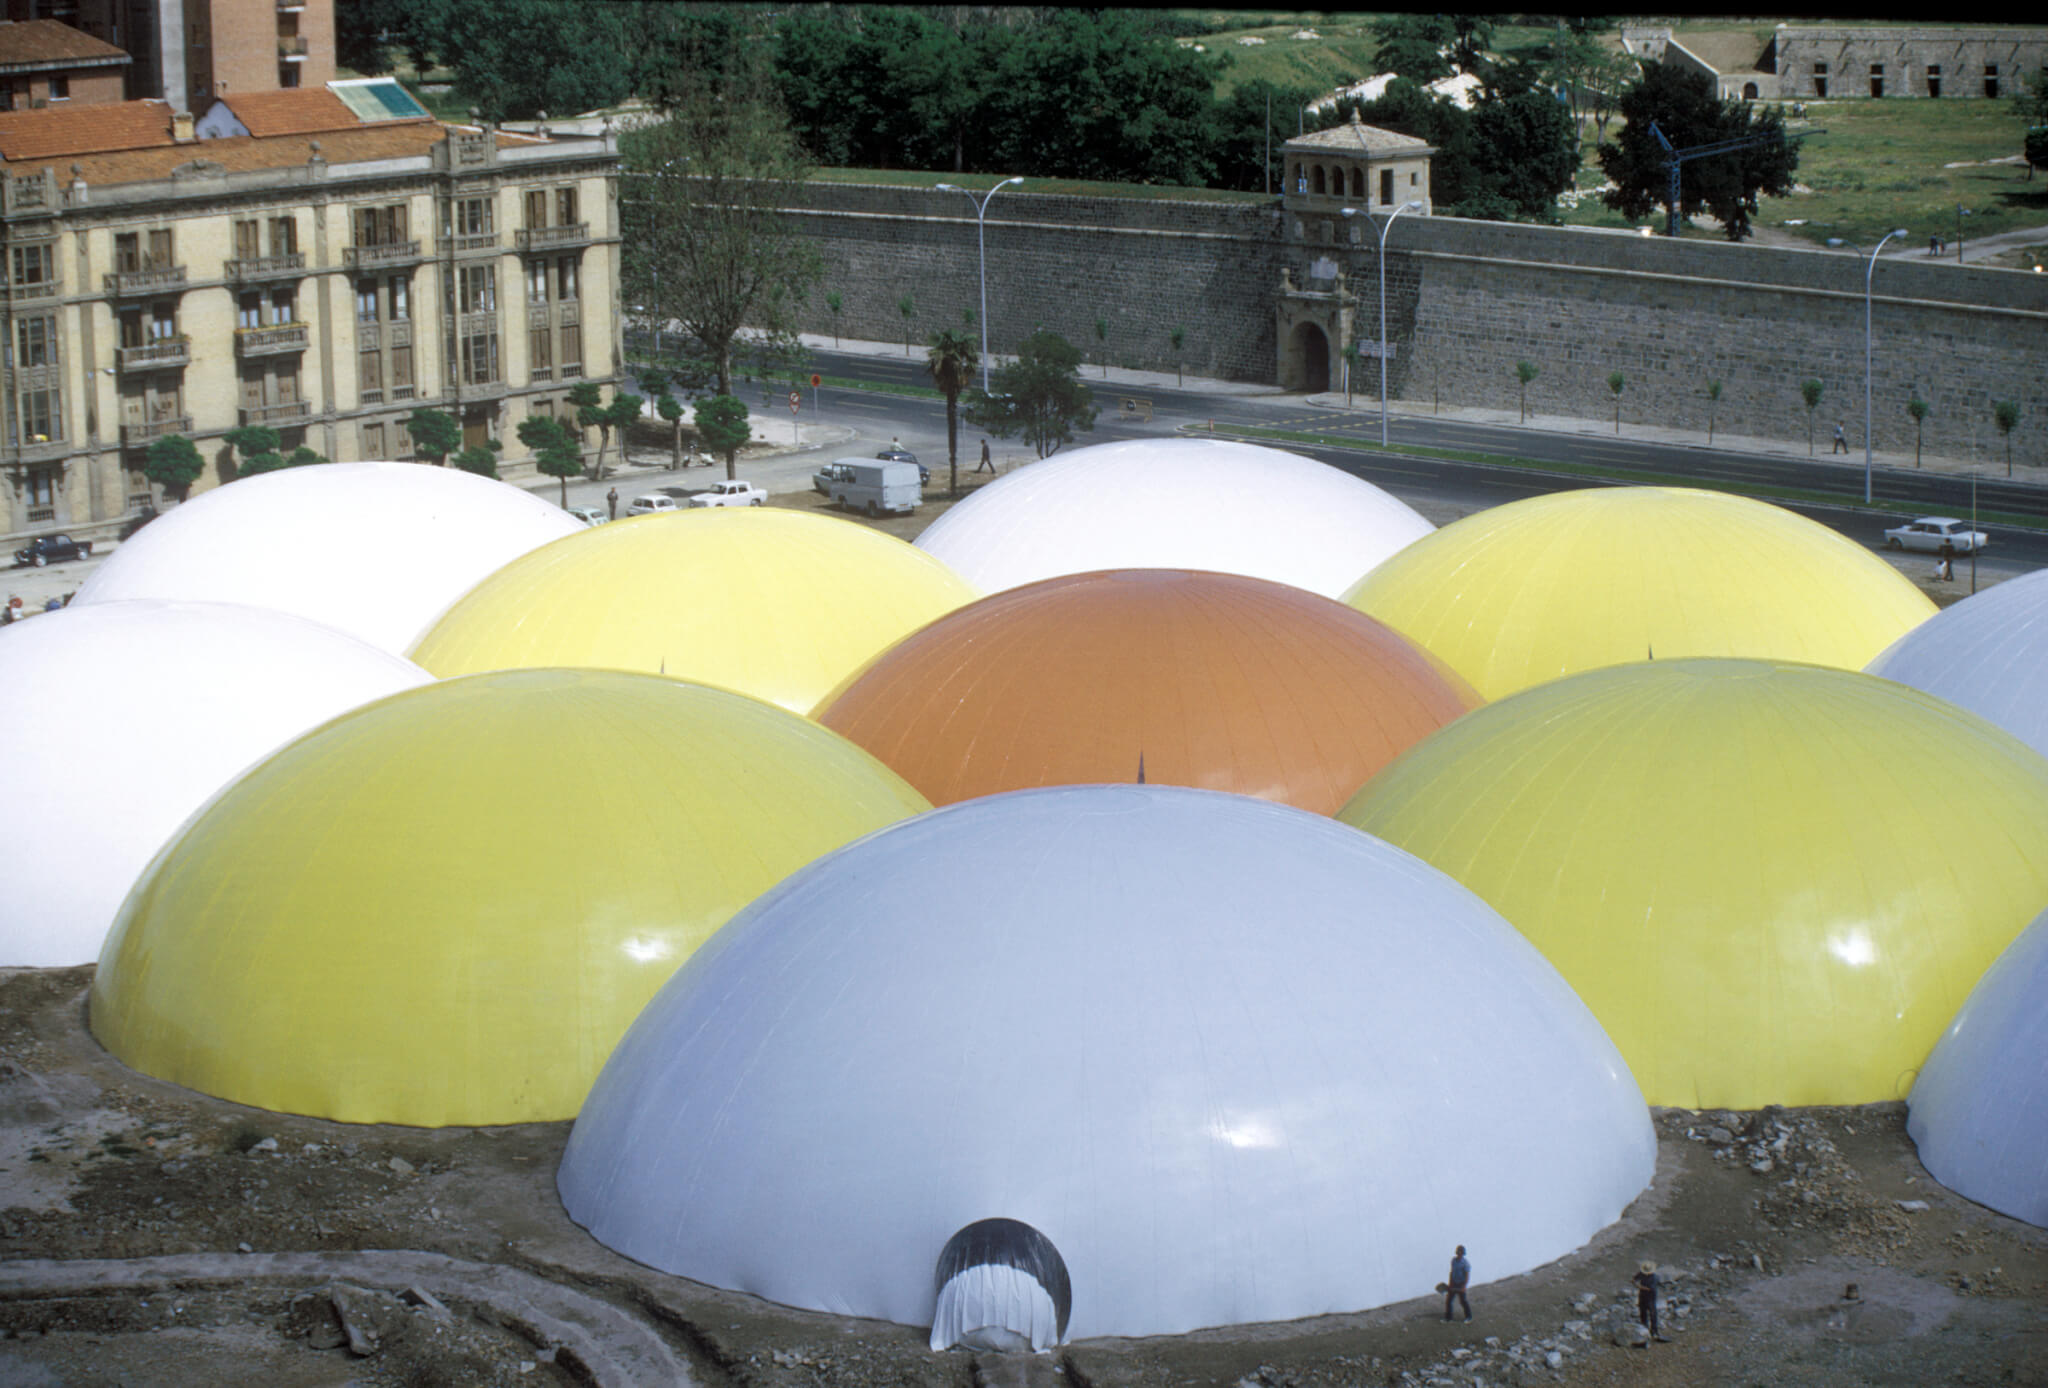 large colored dome structures clustered on a large urban site